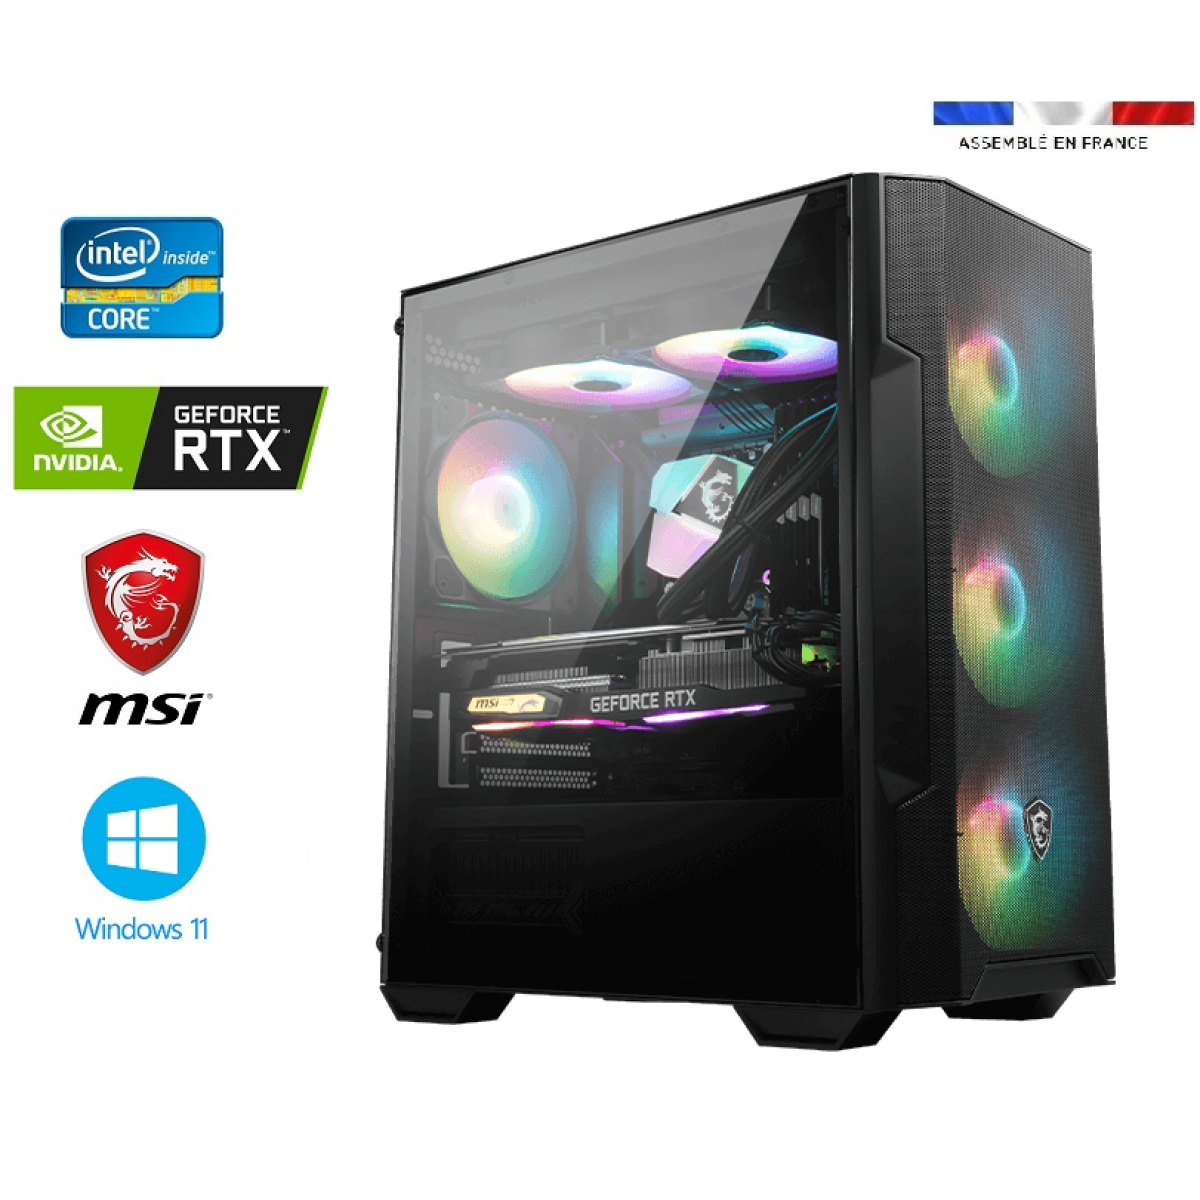 Msi PC Gamer intel I9-11900KF + Watercooling - RTX 4060 8GO MSI GAMING X - 32GO RAM - SSD 1To + HDD 2To - MSI Mag Forge M100R - Windows 11